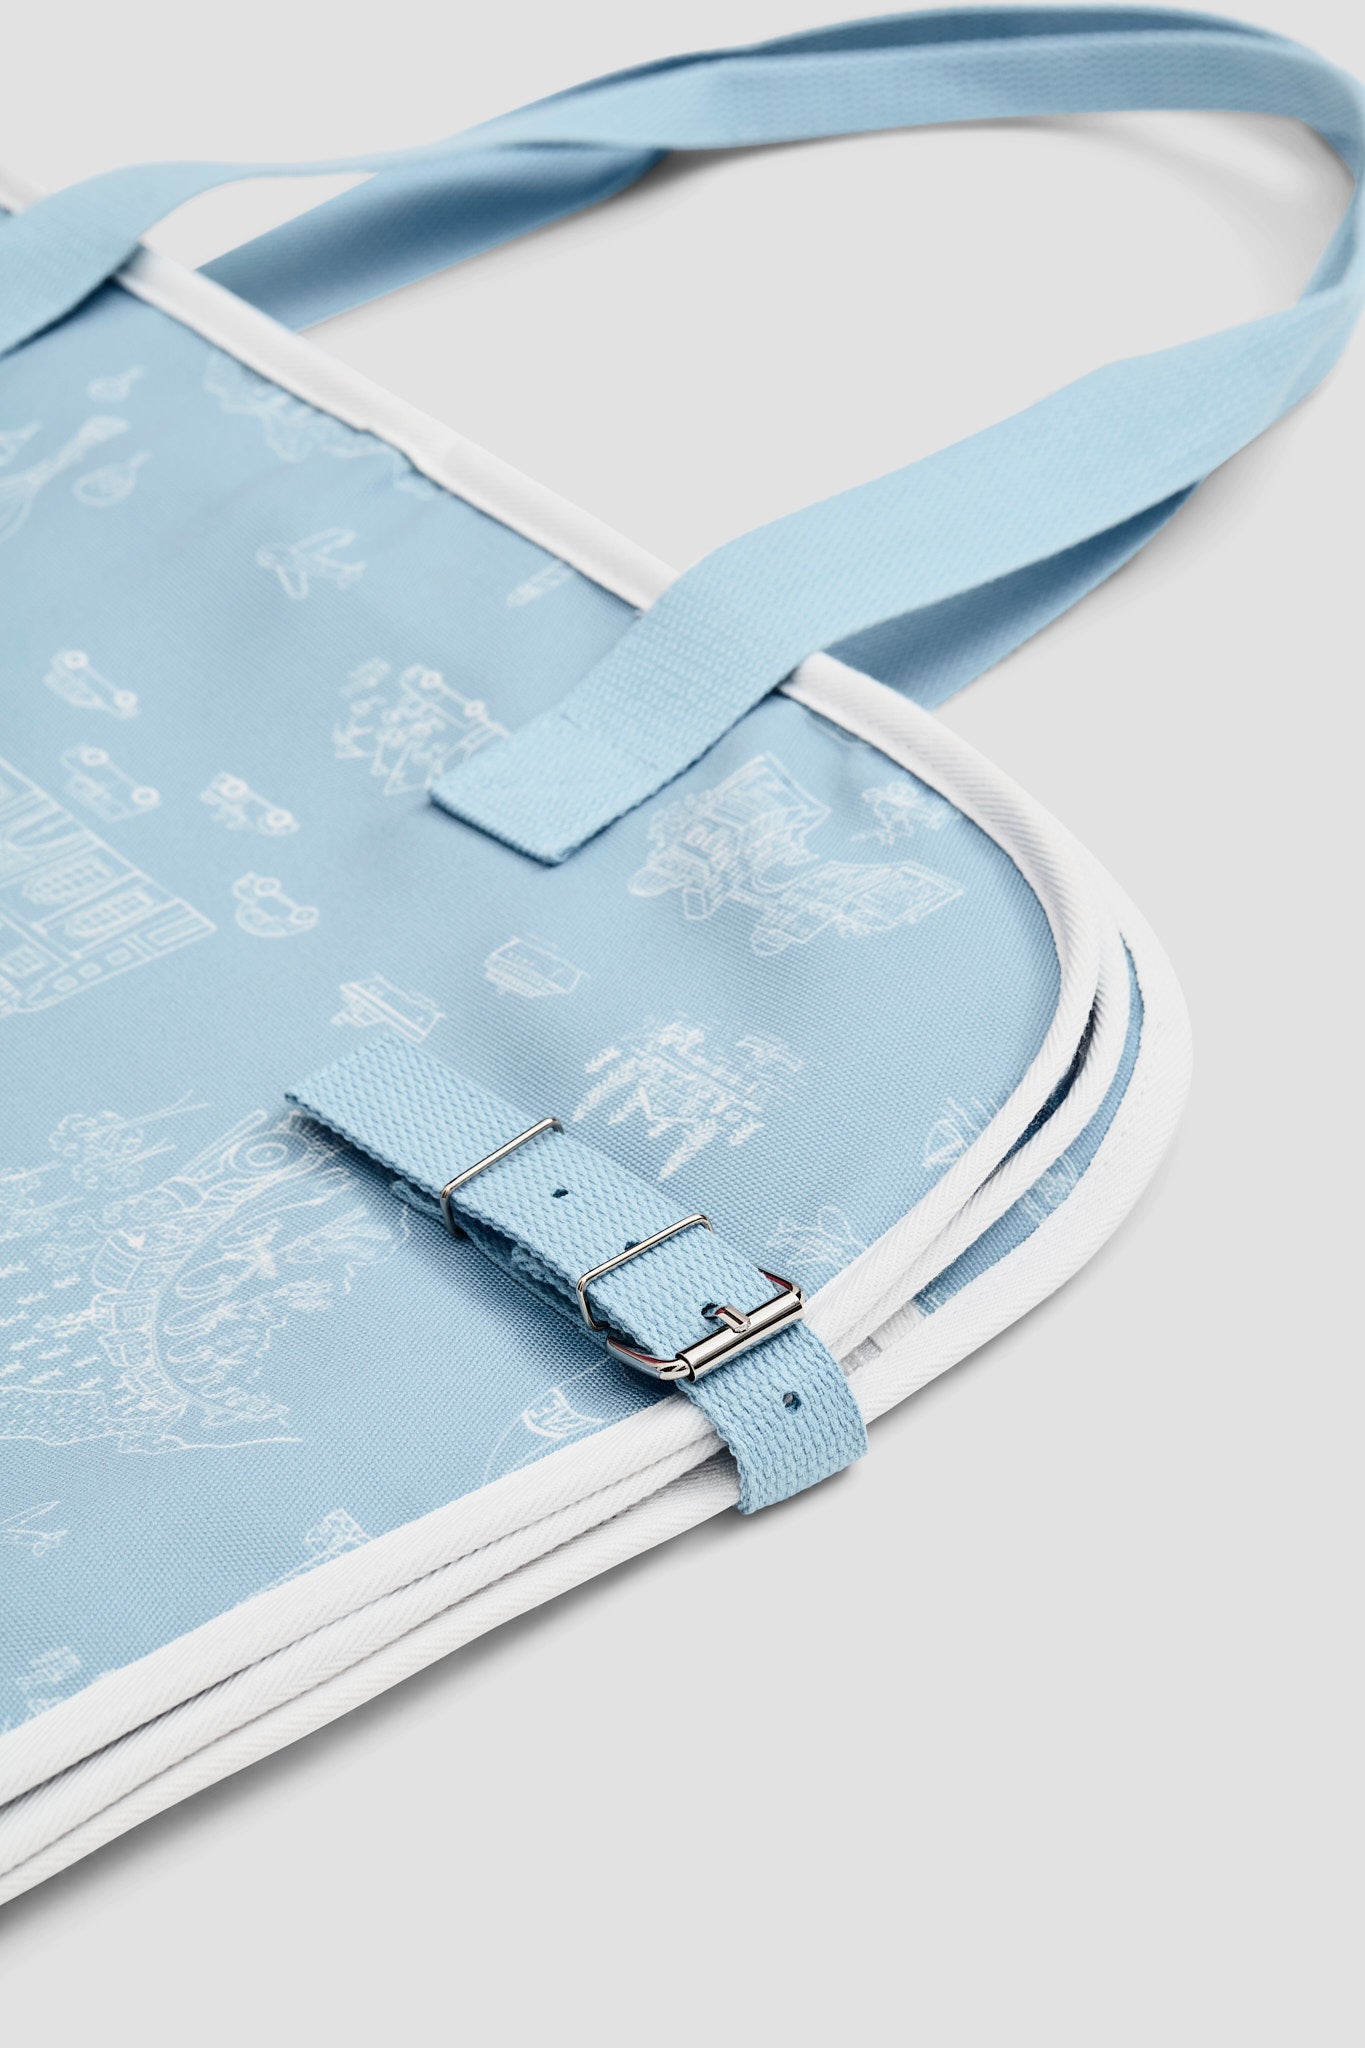 Detail image of garment bag folded with long straps for carrying and adjustable side straps with magnetic fastens.